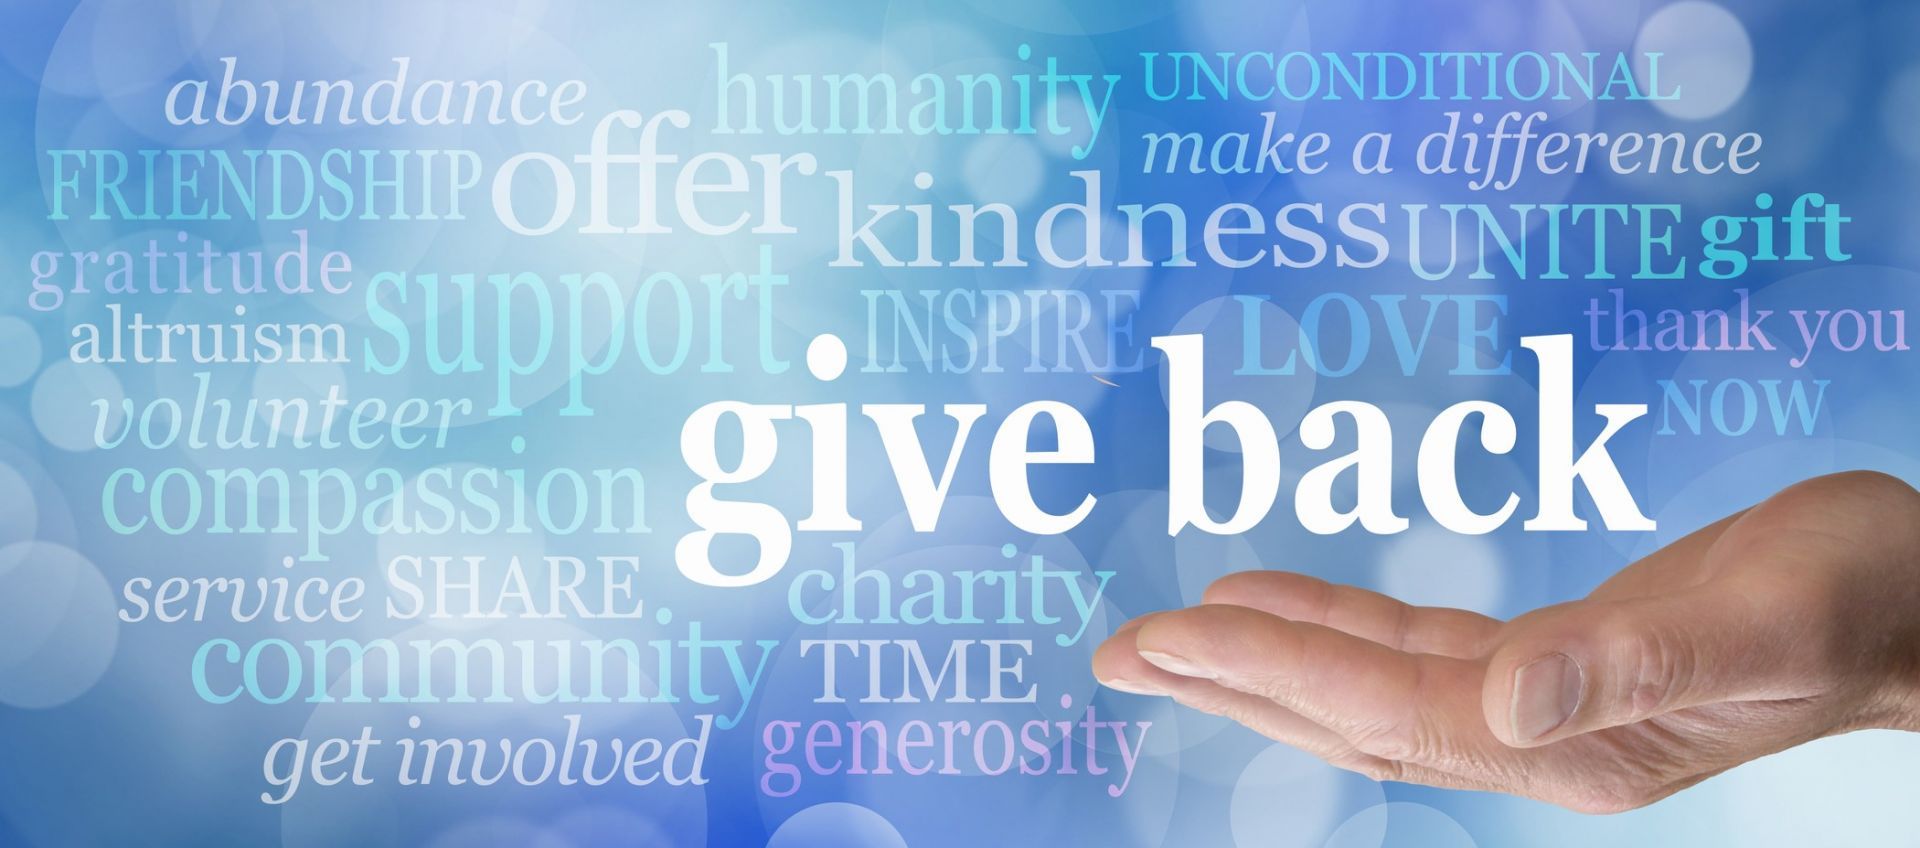 Give Back Graphic.jpg